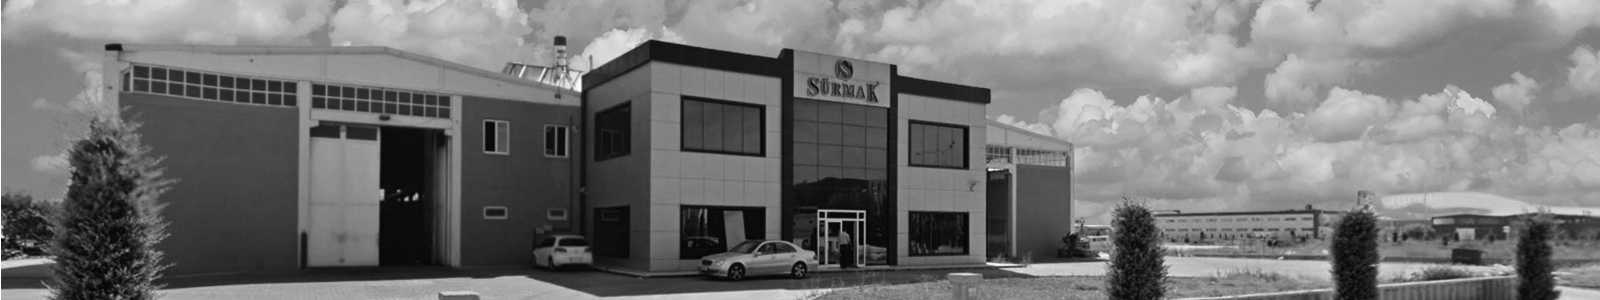 Surmak Agricultural Machinery